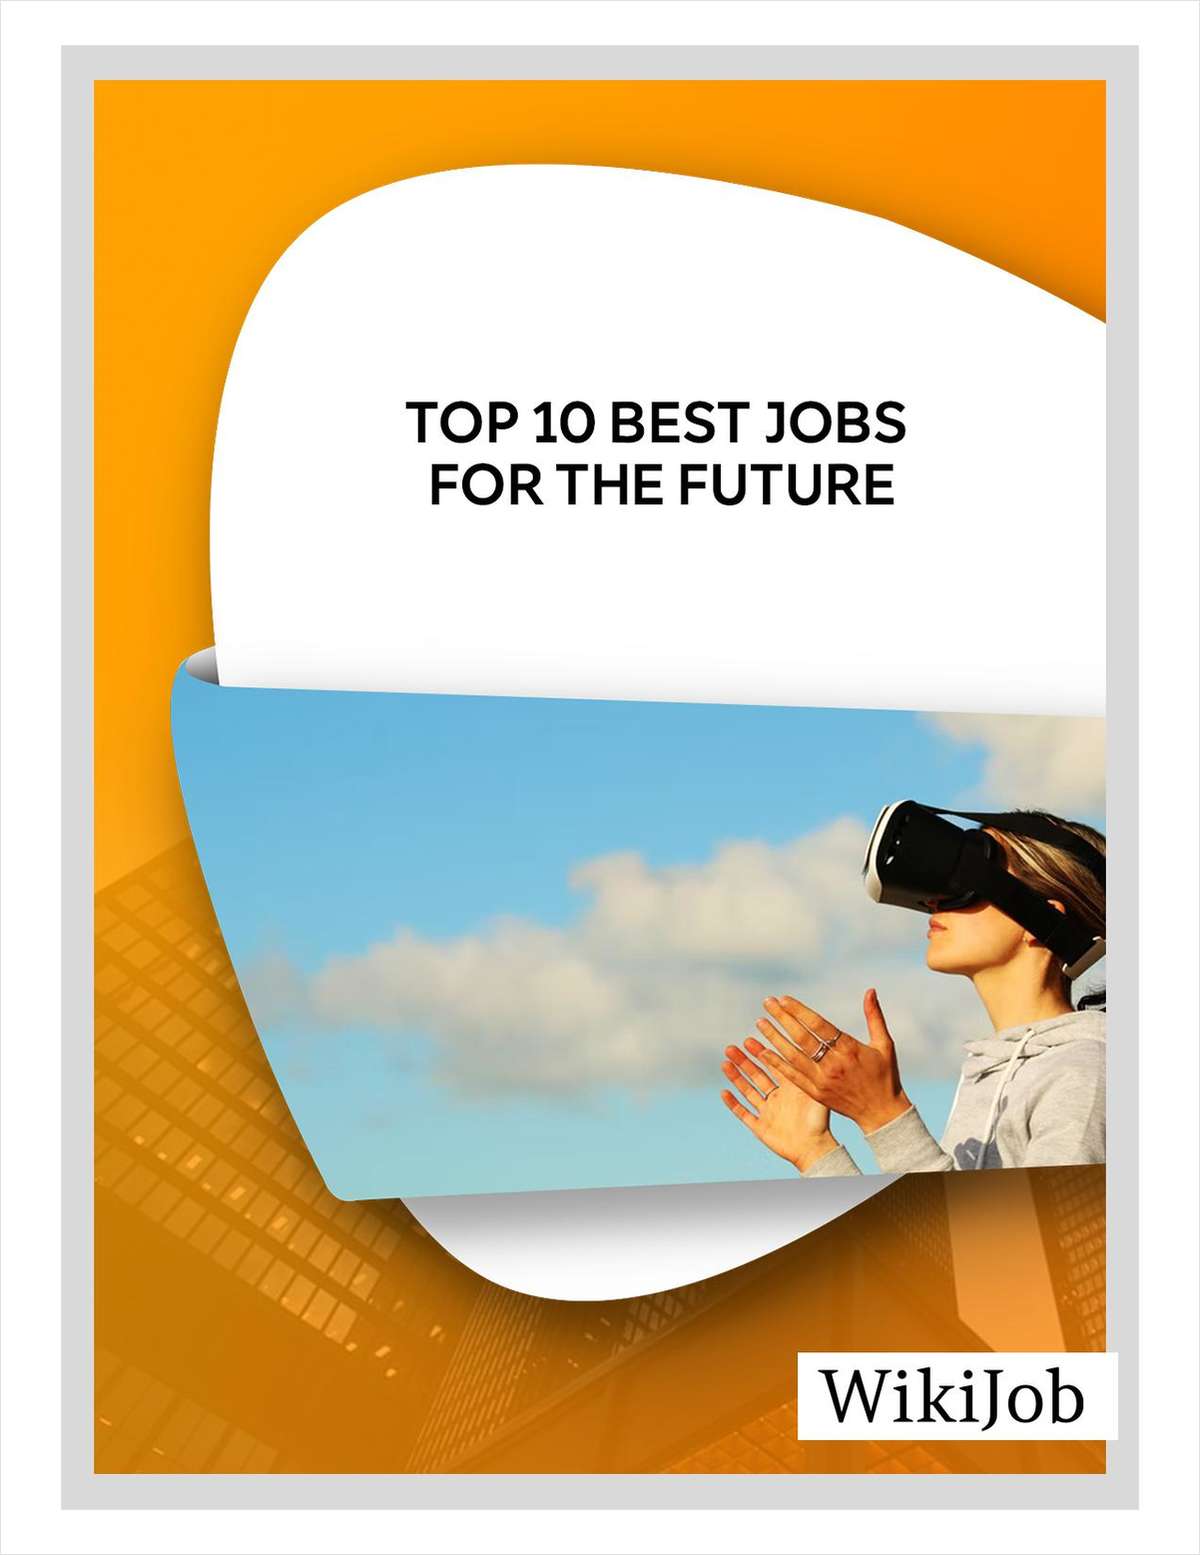 Top 10 Best Jobs for the Future